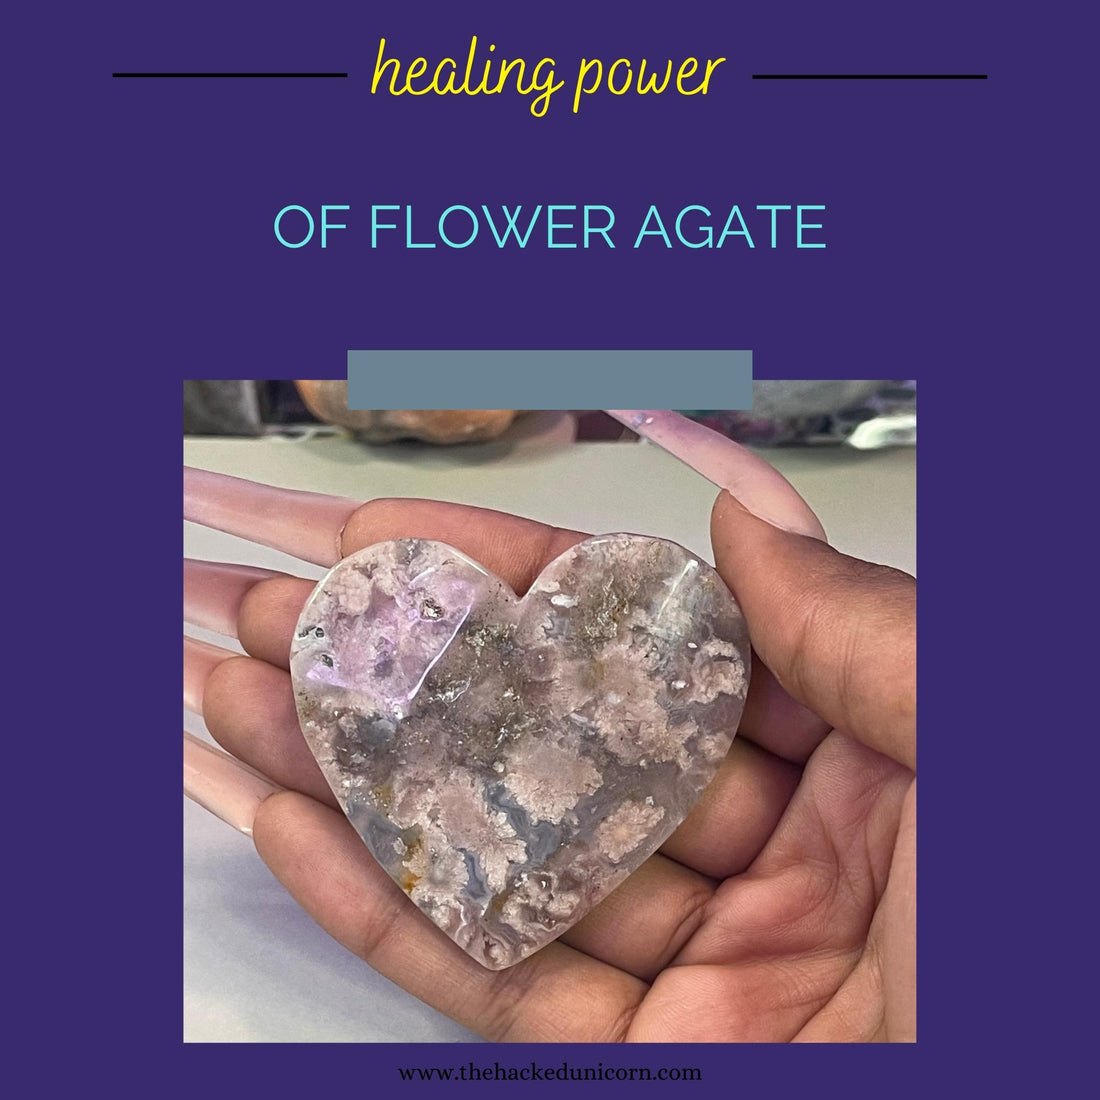 The Healing Power of Flower Agate